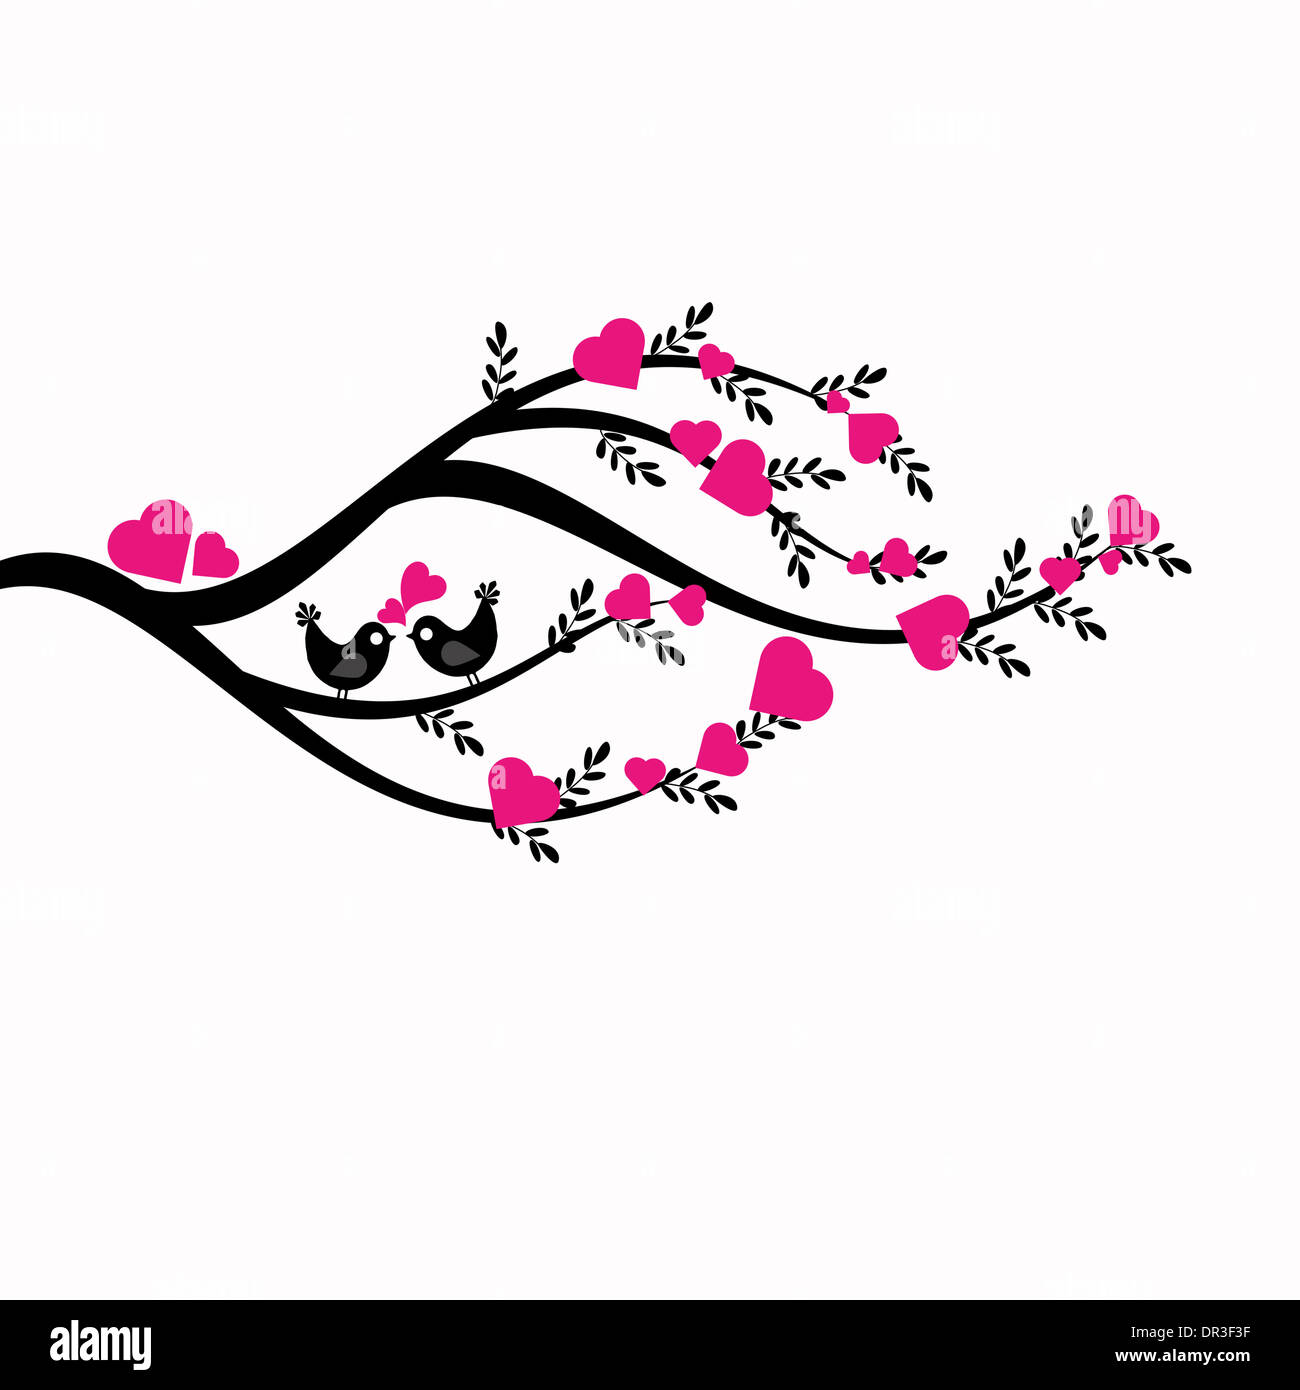 Love tree with birds on branches Stock Photo